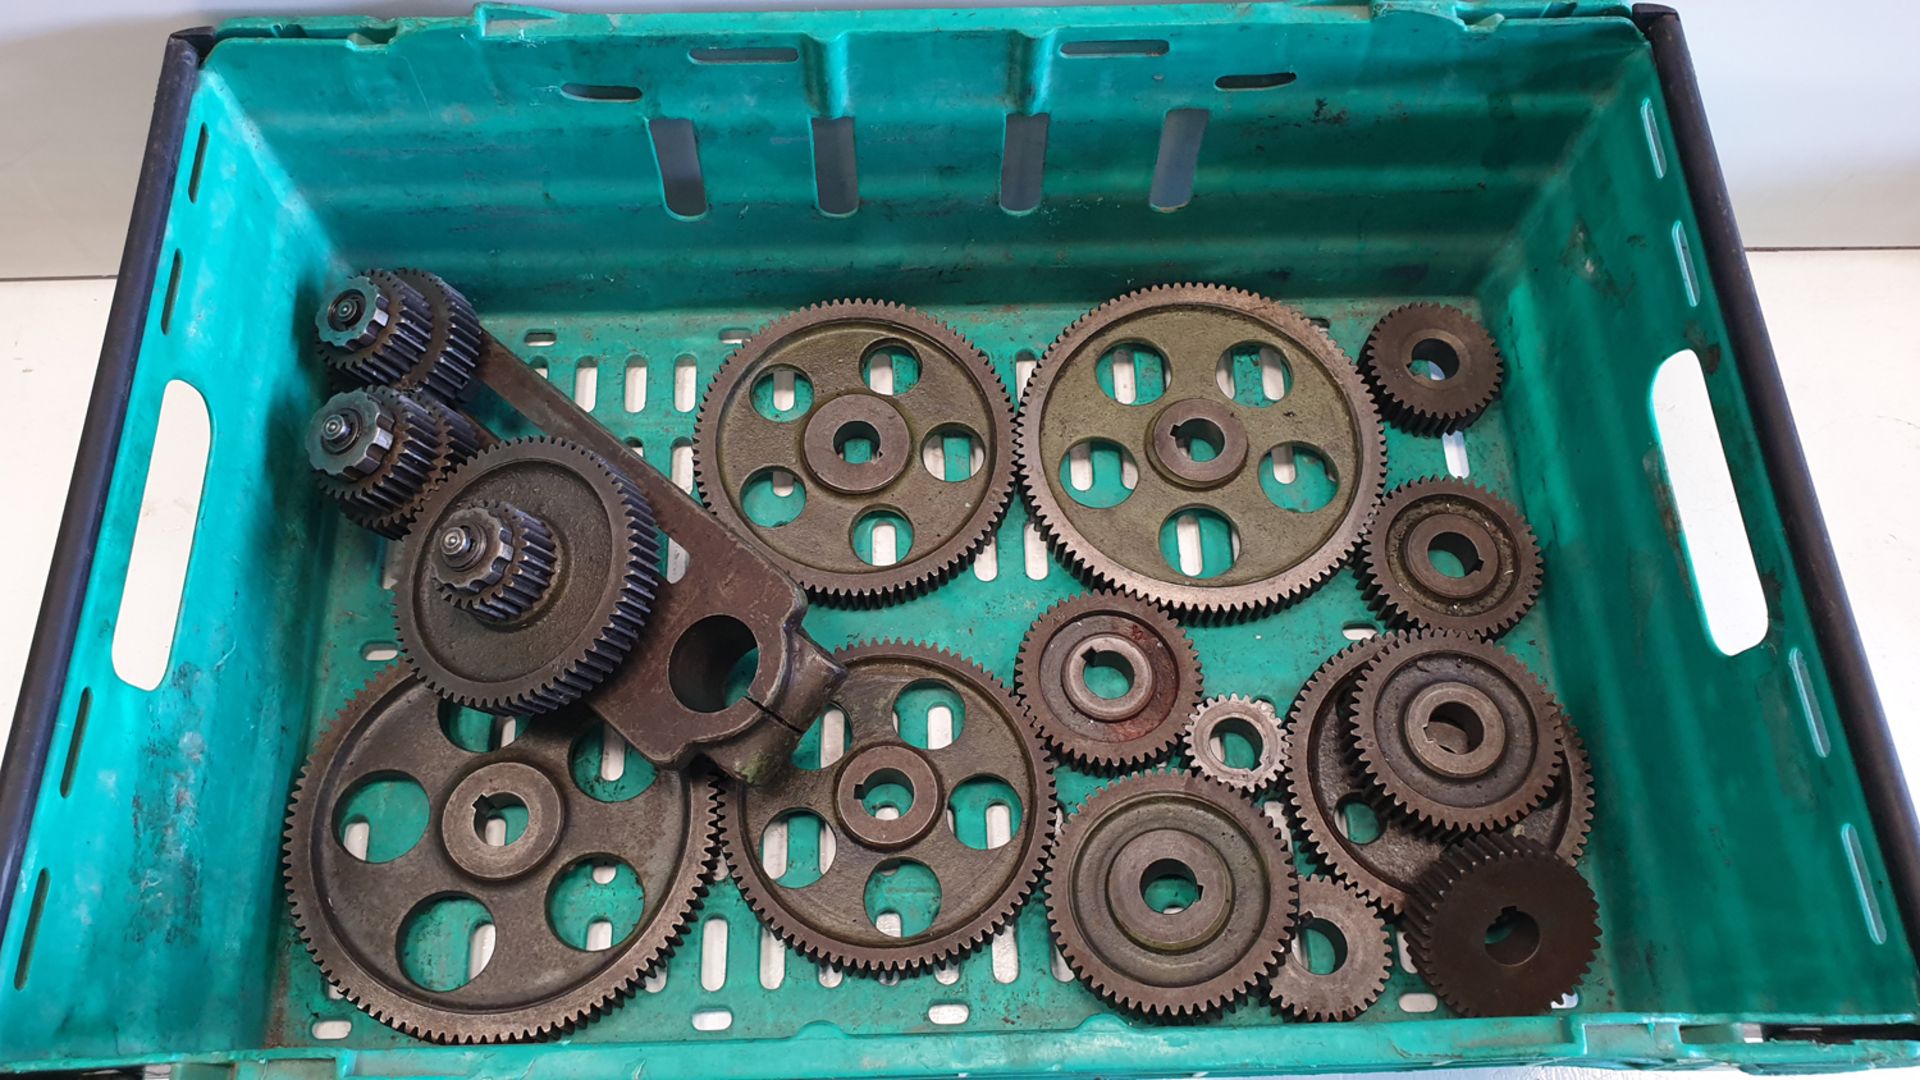 Gear Train and Gears for Milling Machine Table. Bore of Gears 22mm. With of Gears 20mm.